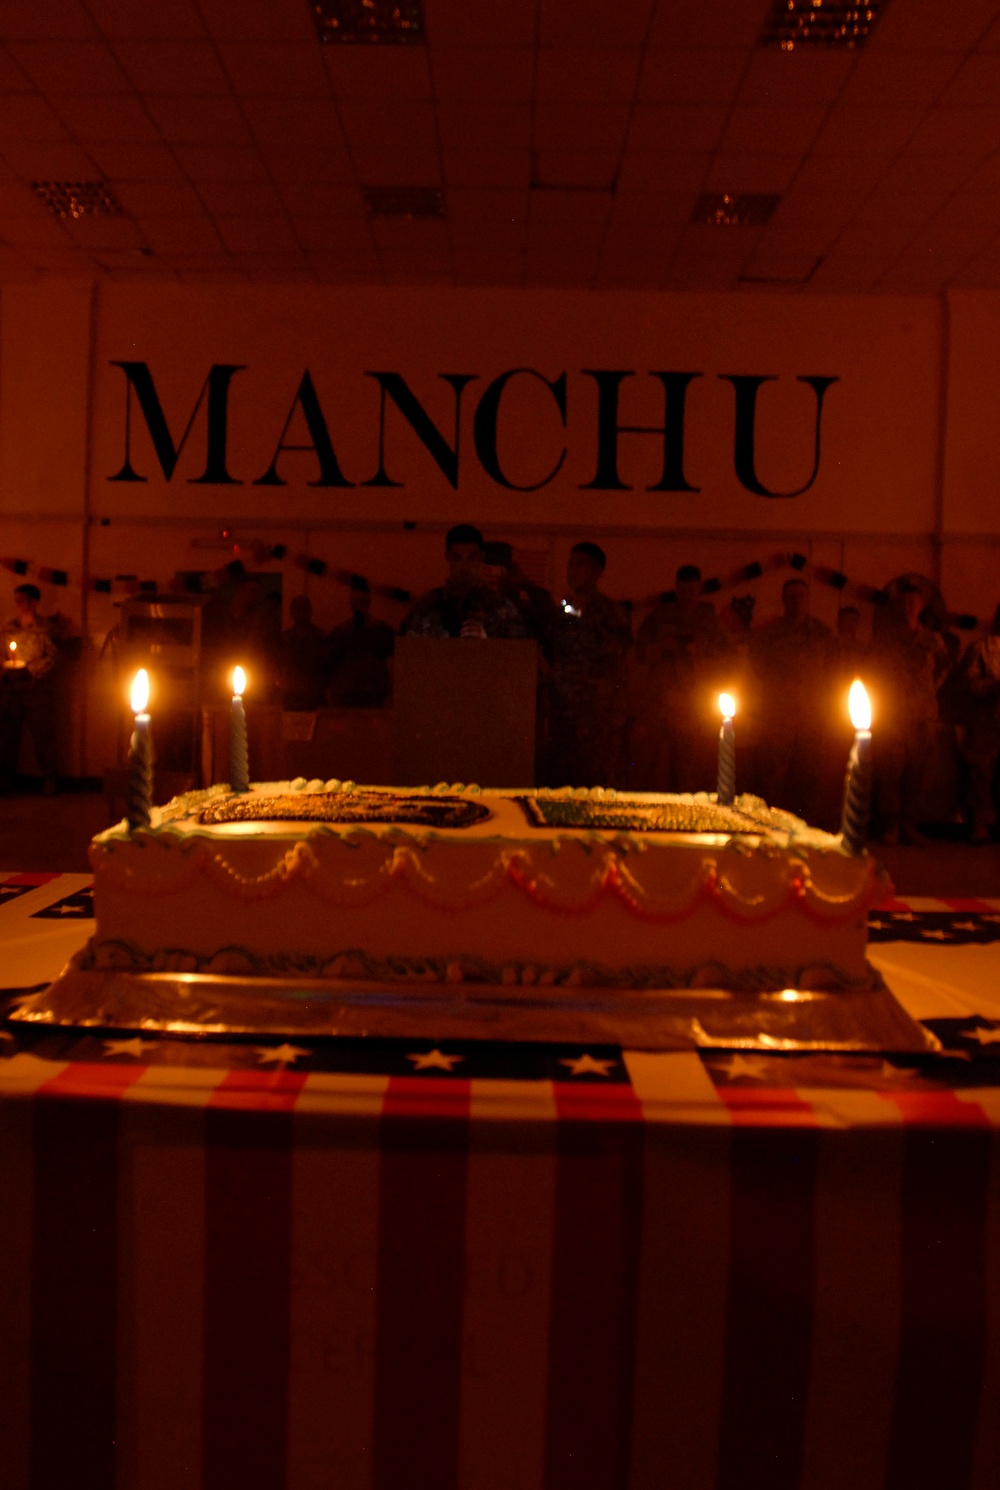 Manchus celebrate Army birthday in special way